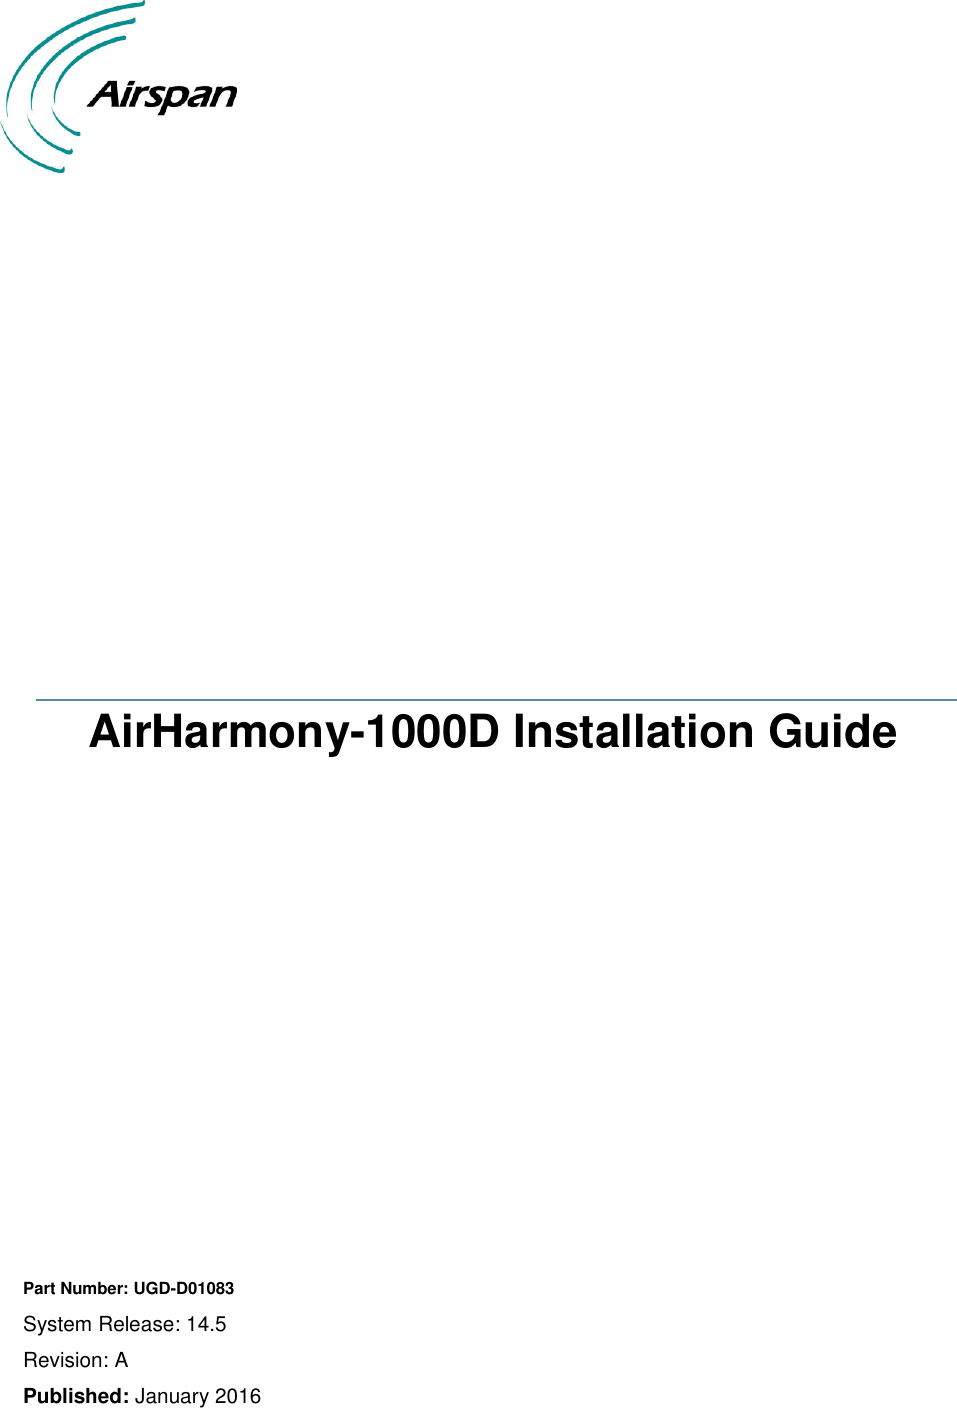                       AirHarmony-1000D Installation Guide                Part Number: UGD-D01083 System Release: 14.5 Revision: A Published: January 2016  